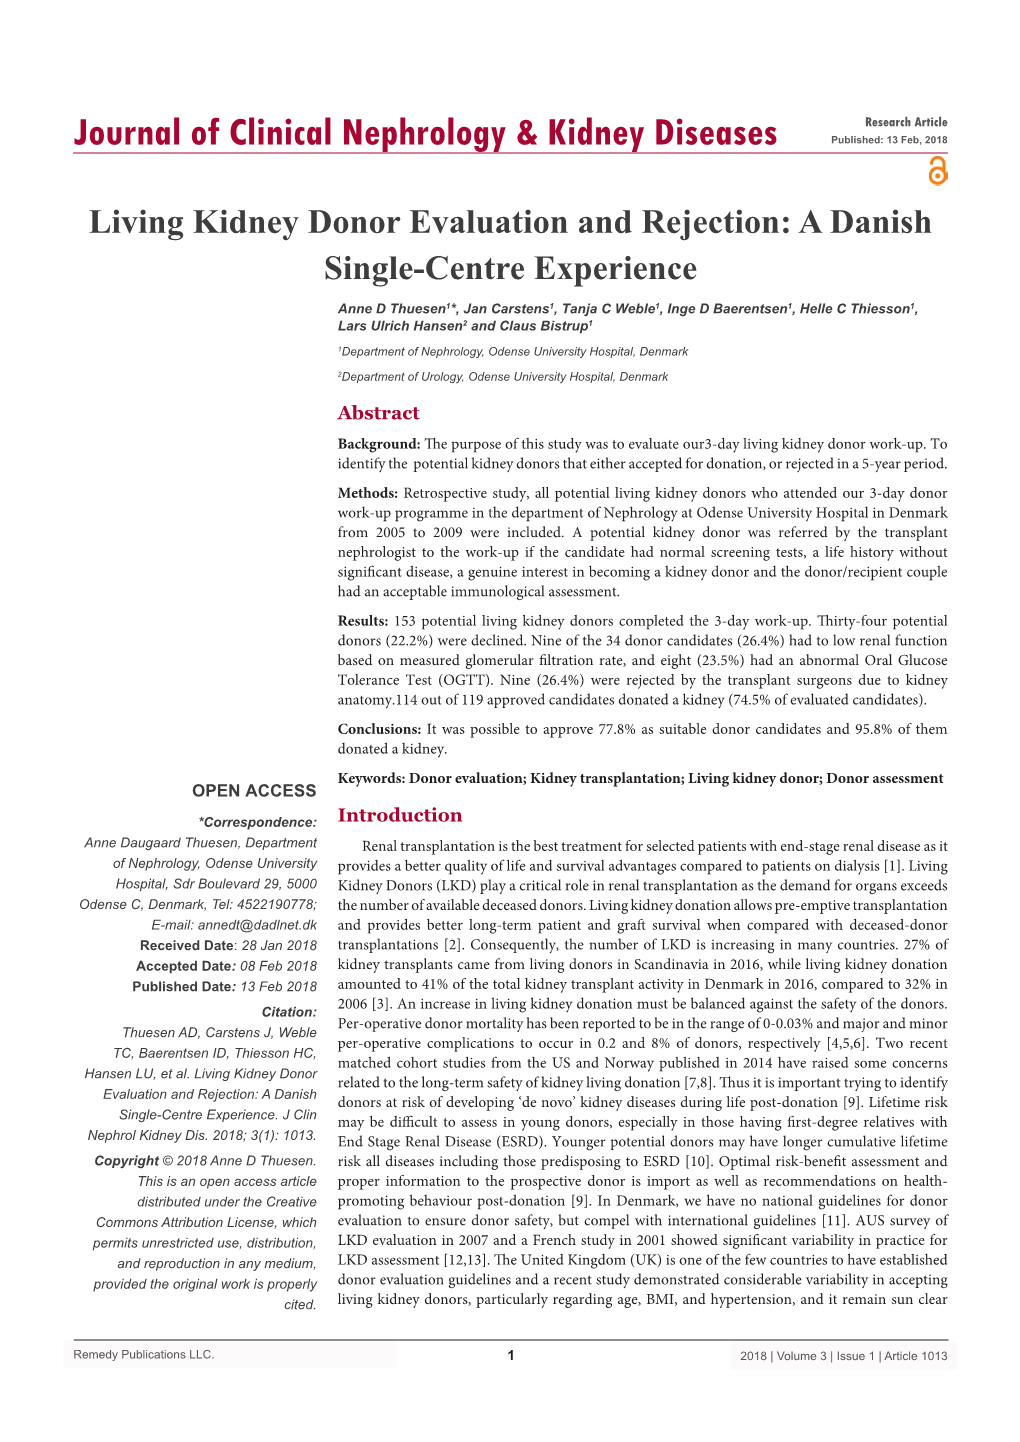 Living Kidney Donor Evaluation and Rejection: a Danish Single-Centre Experience